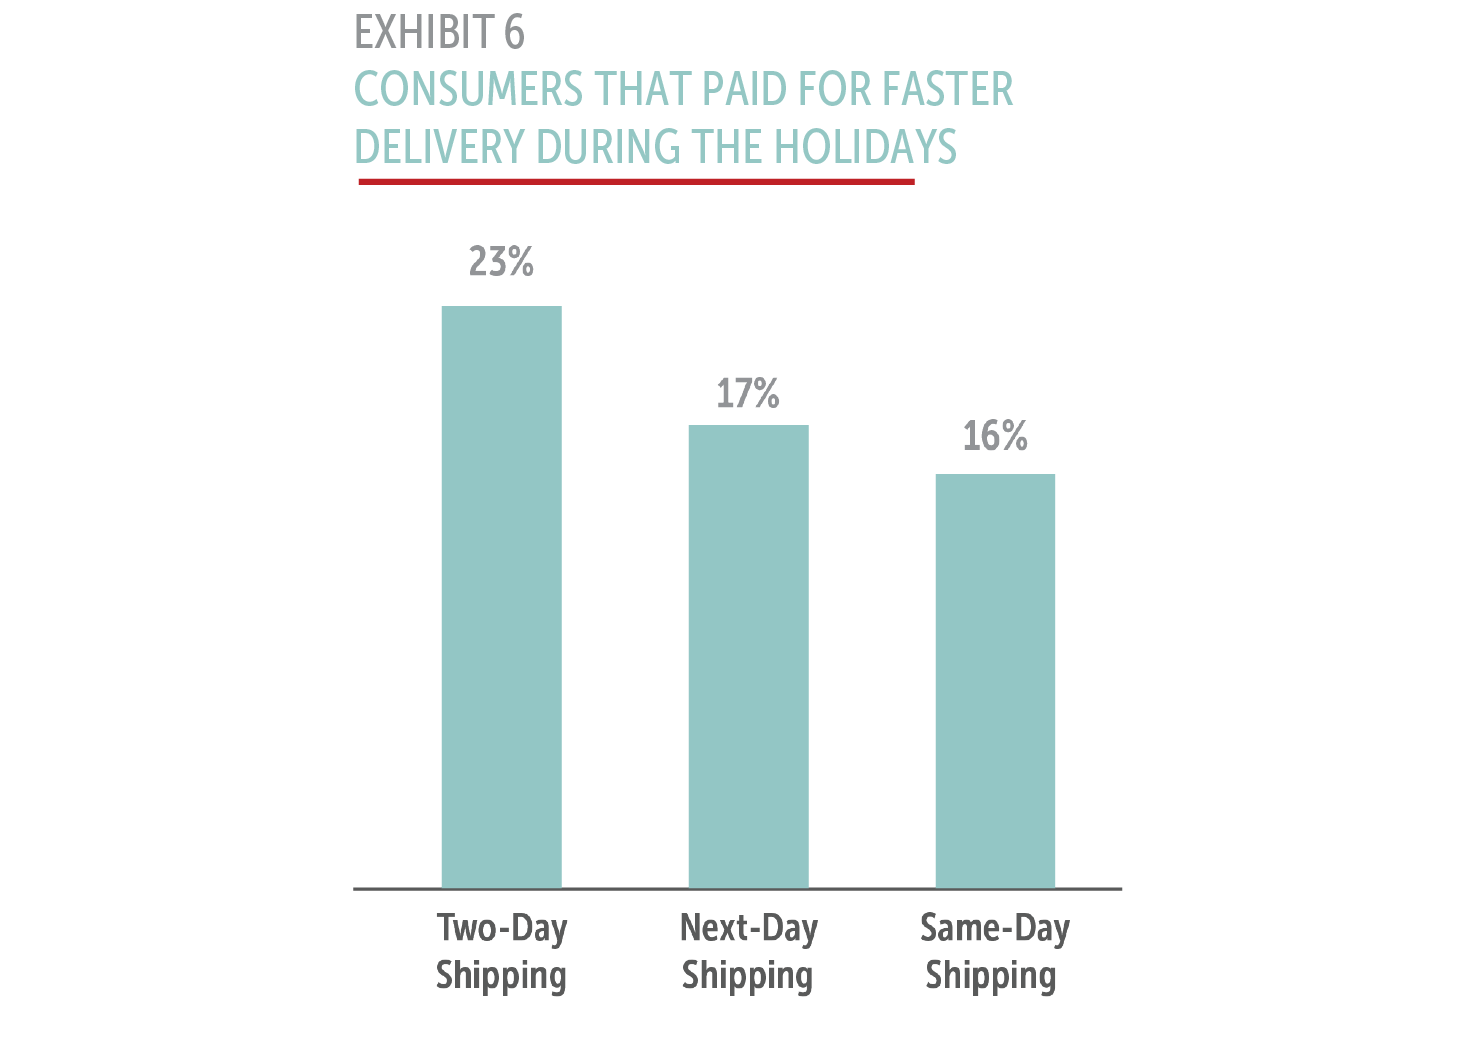 Consumers that paid for faster delivery during the holidays